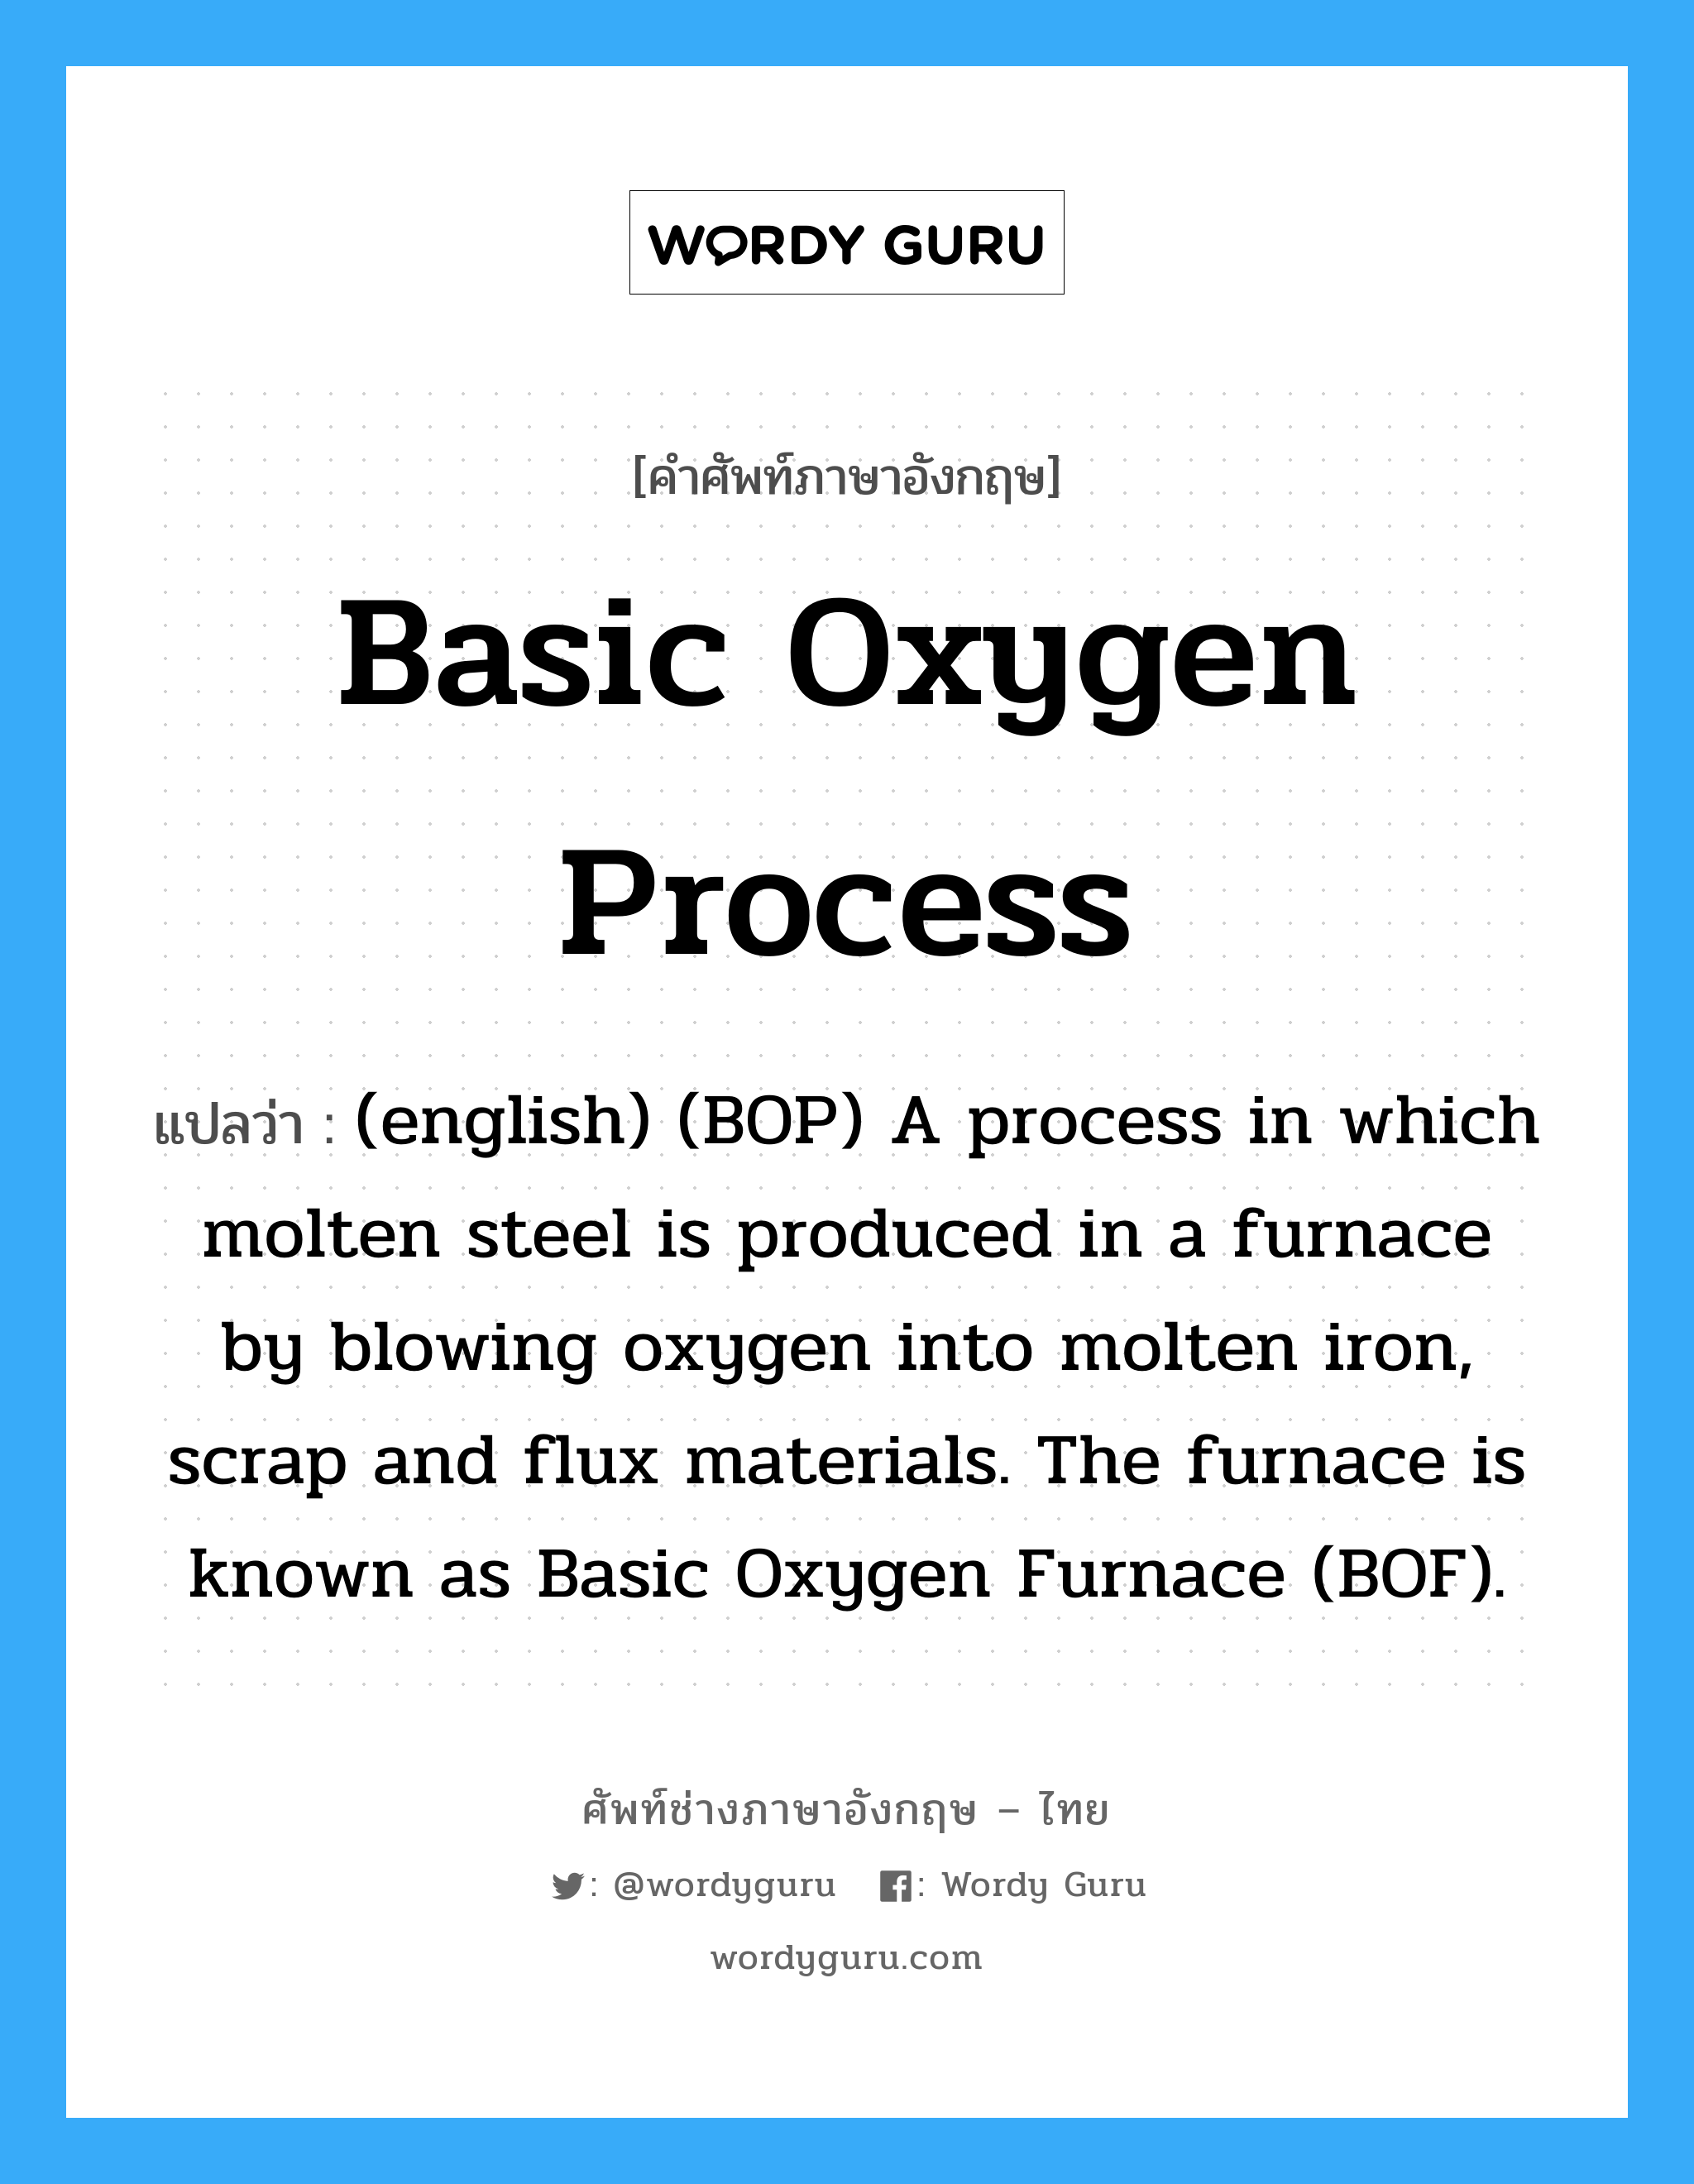 Basic Oxygen Process แปลว่า?, คำศัพท์ช่างภาษาอังกฤษ - ไทย Basic Oxygen Process คำศัพท์ภาษาอังกฤษ Basic Oxygen Process แปลว่า (english) (BOP) A process in which molten steel is produced in a furnace by blowing oxygen into molten iron, scrap and flux materials. The furnace is known as Basic Oxygen Furnace (BOF).